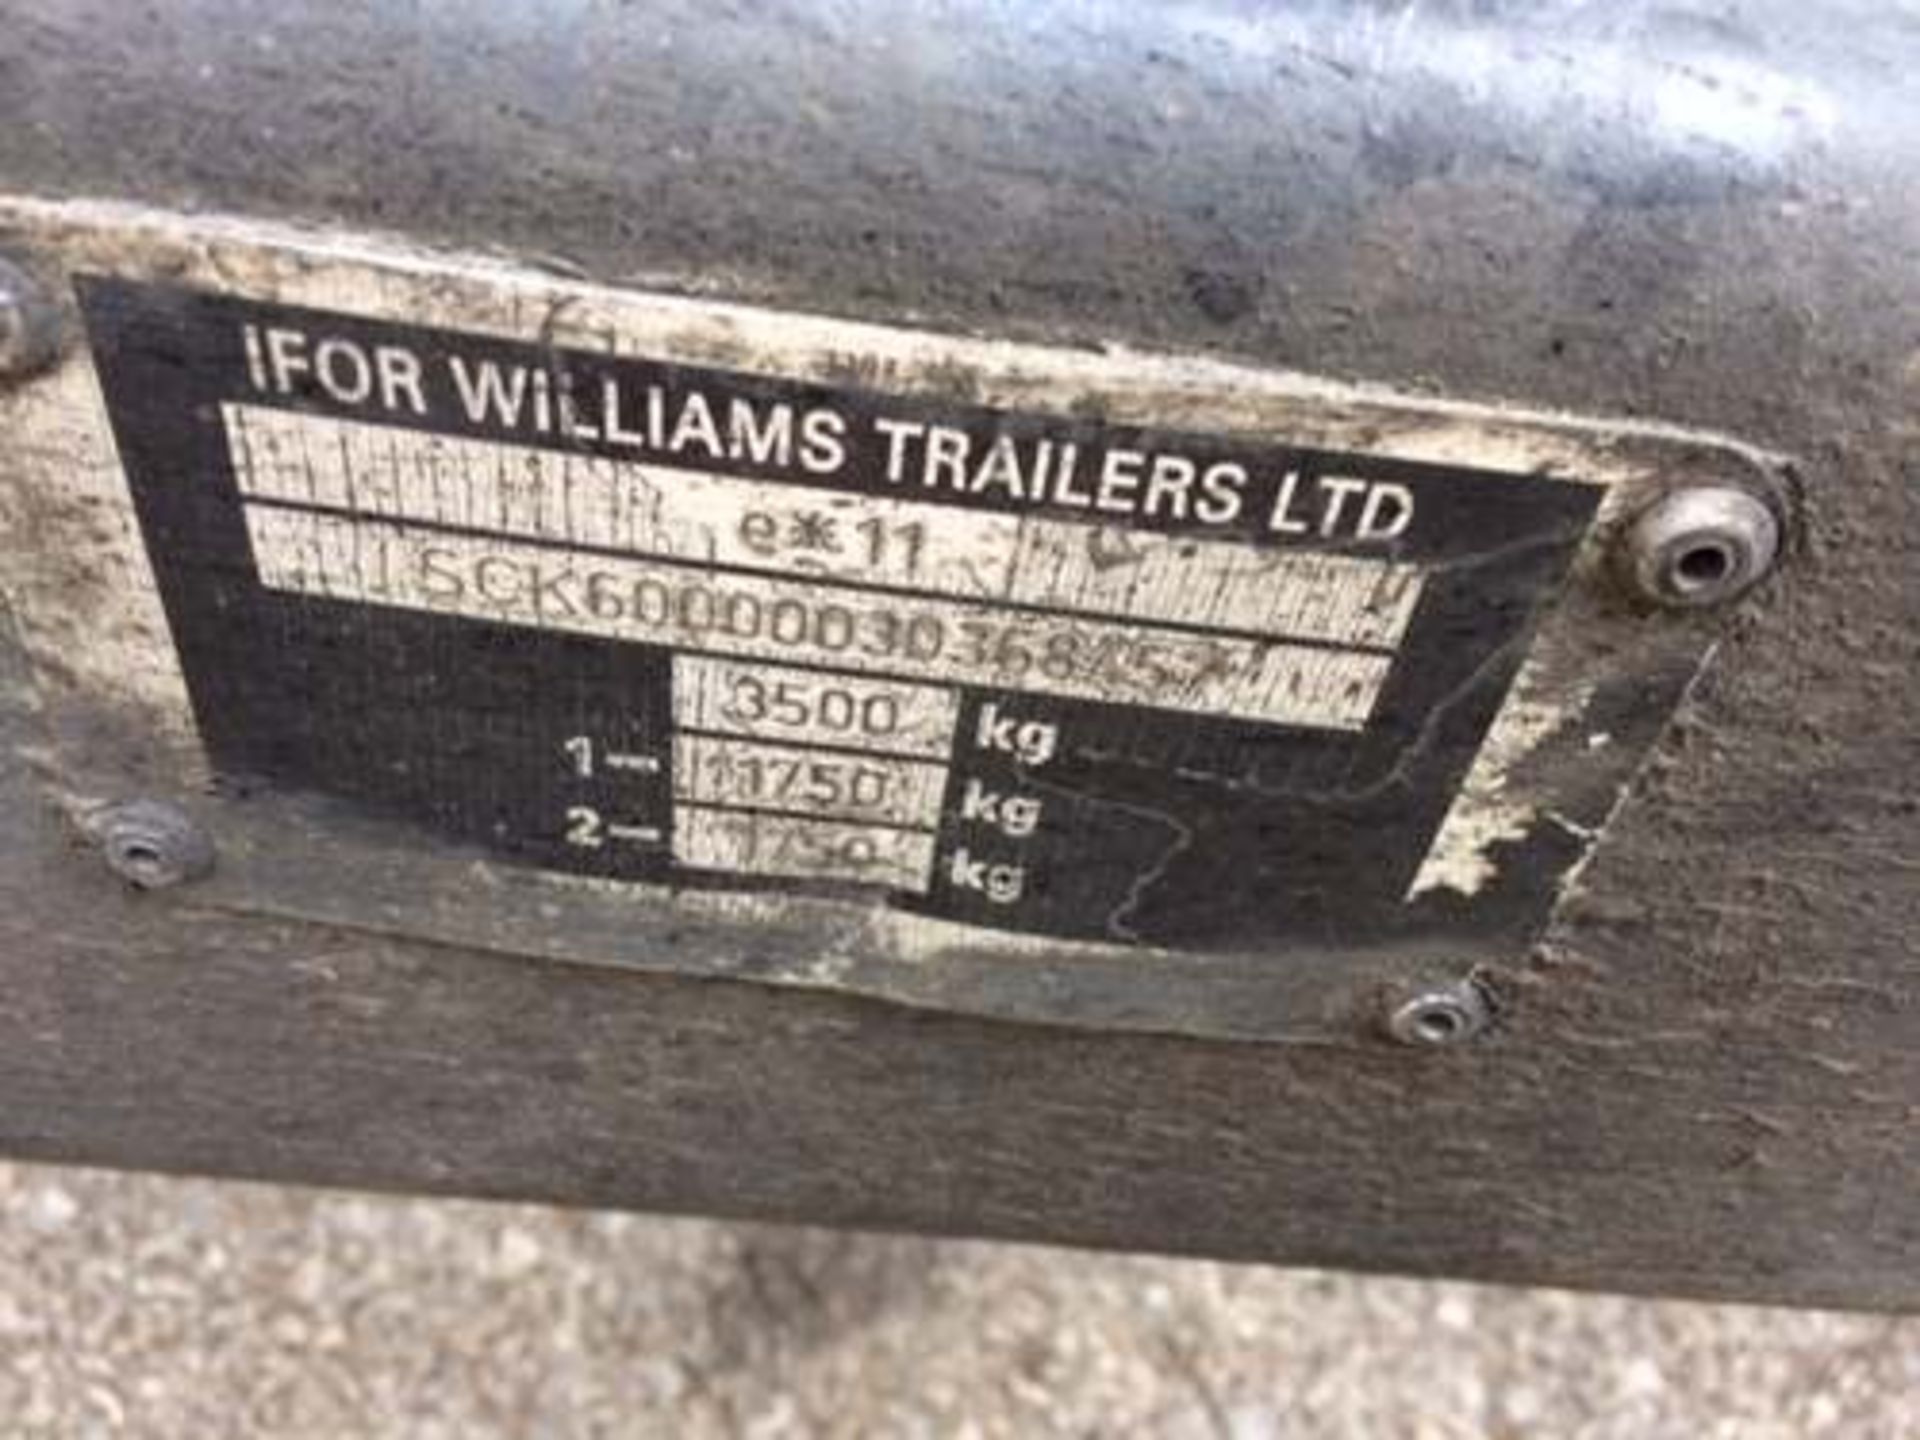 Chassis number SCK60000030368457 IFOR WILLIAMS - Tilt bed beaver tail tandem axle car trailer - Image 8 of 8